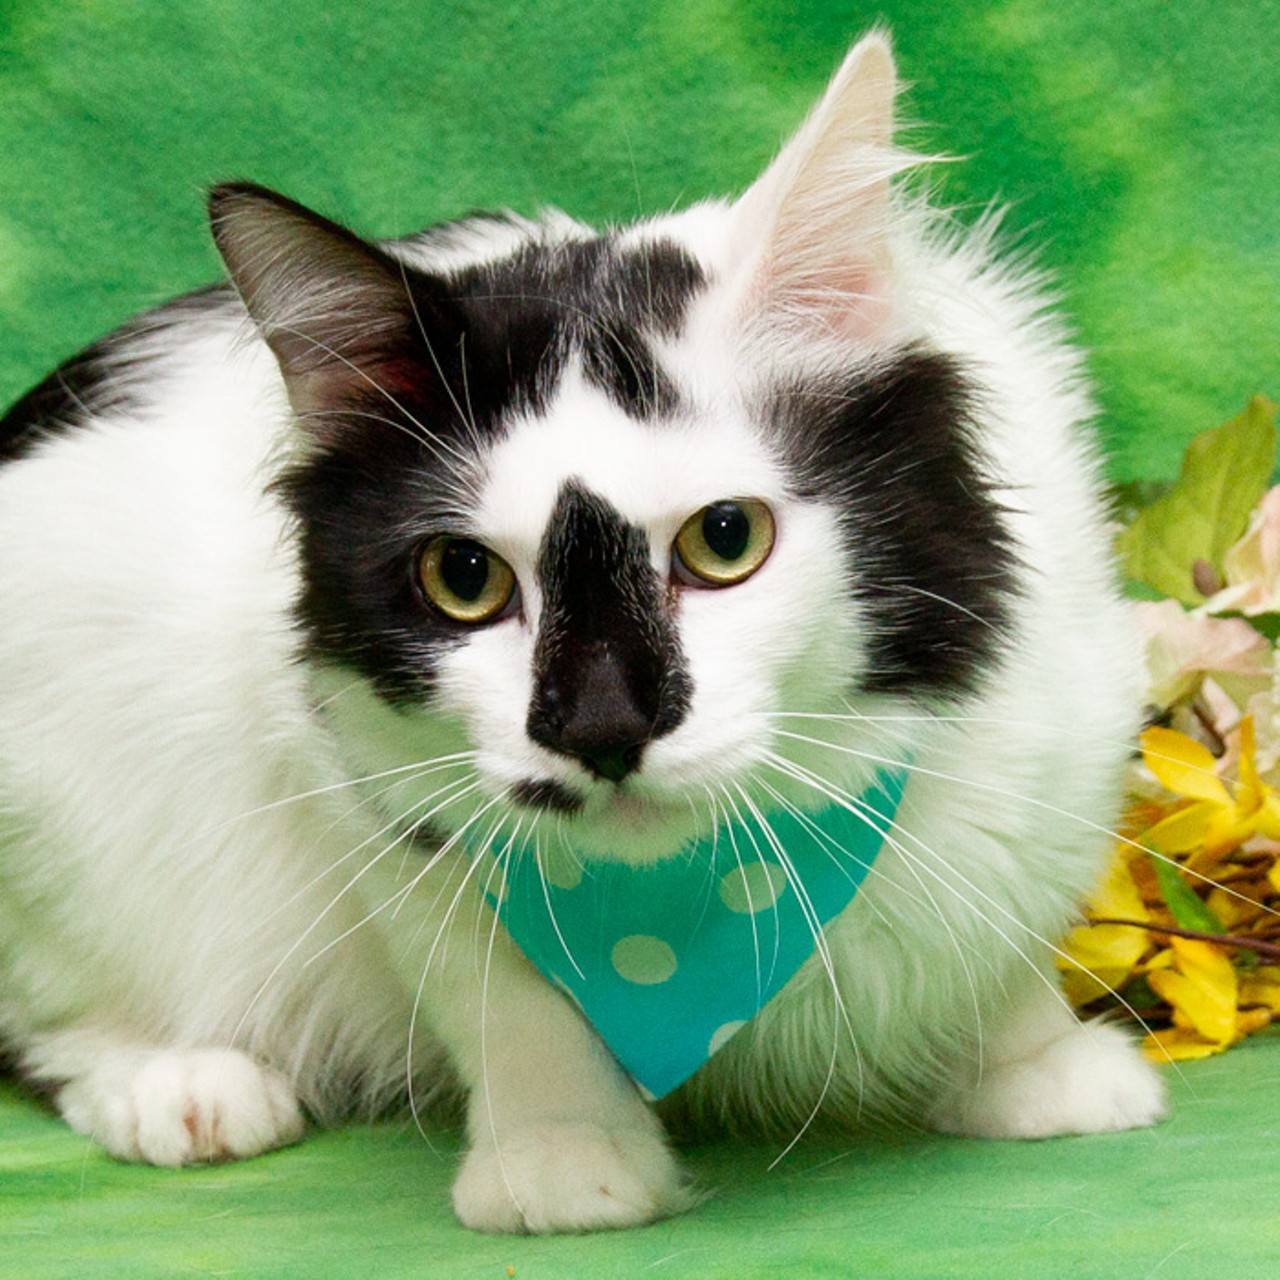 NAME: Fluff 
GENDER:  Male
BREED:  Domestic Longhair
AGE:  3 years, 1 month
WEIGHT:  9 pounds
SPECIAL CONSIDERATIONS:  Fluff and all other cats four months and older are free through August 31.
REASON I CAME TO MHS:  Agency transfer
LOCATION:  Premier Pet Supply of Novi
ID NUMBER:  871323